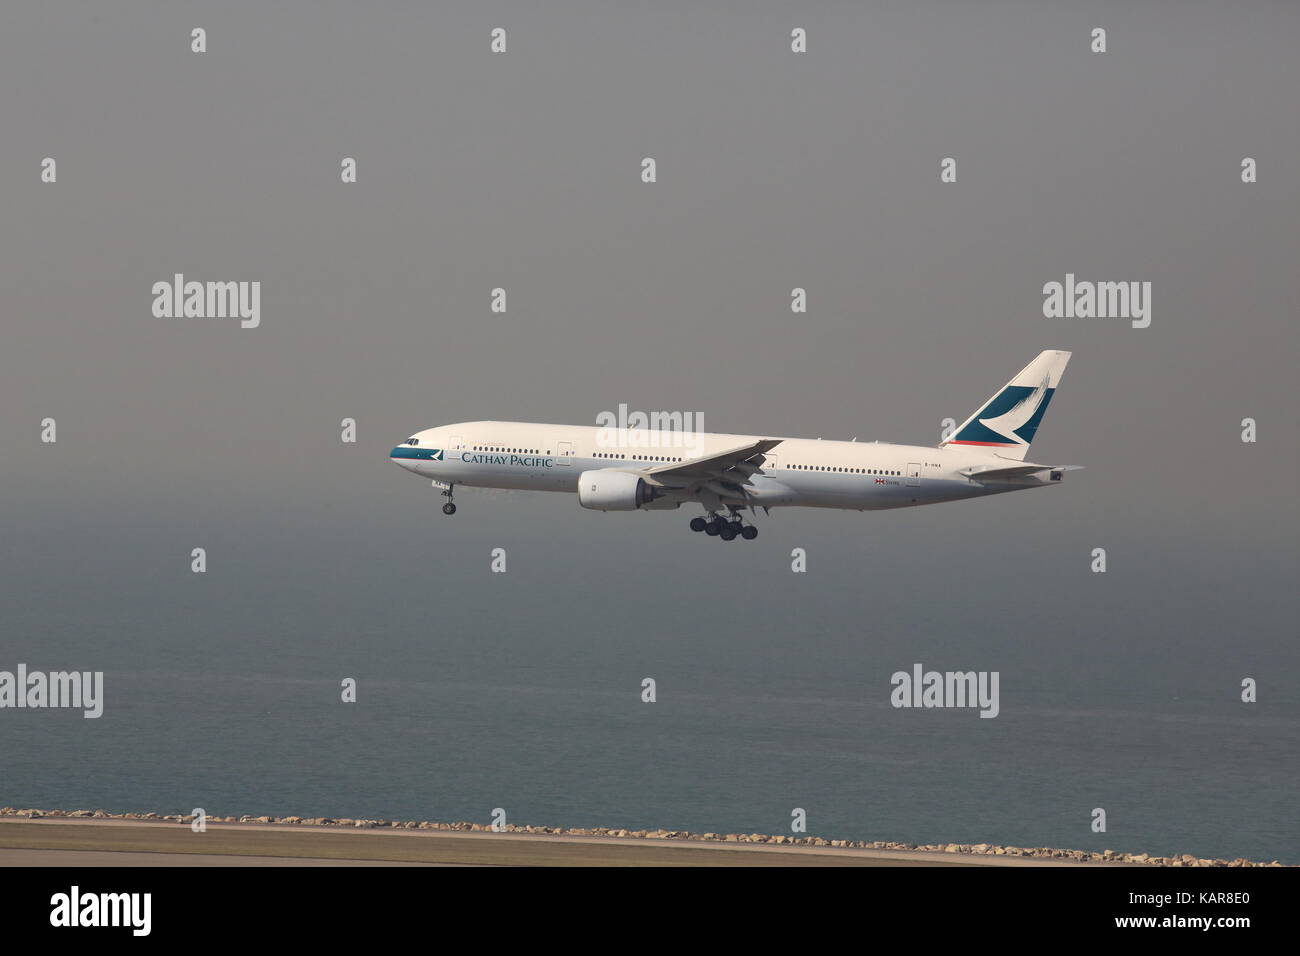 the plane is landing in Hong Kong international airport Stock Photo